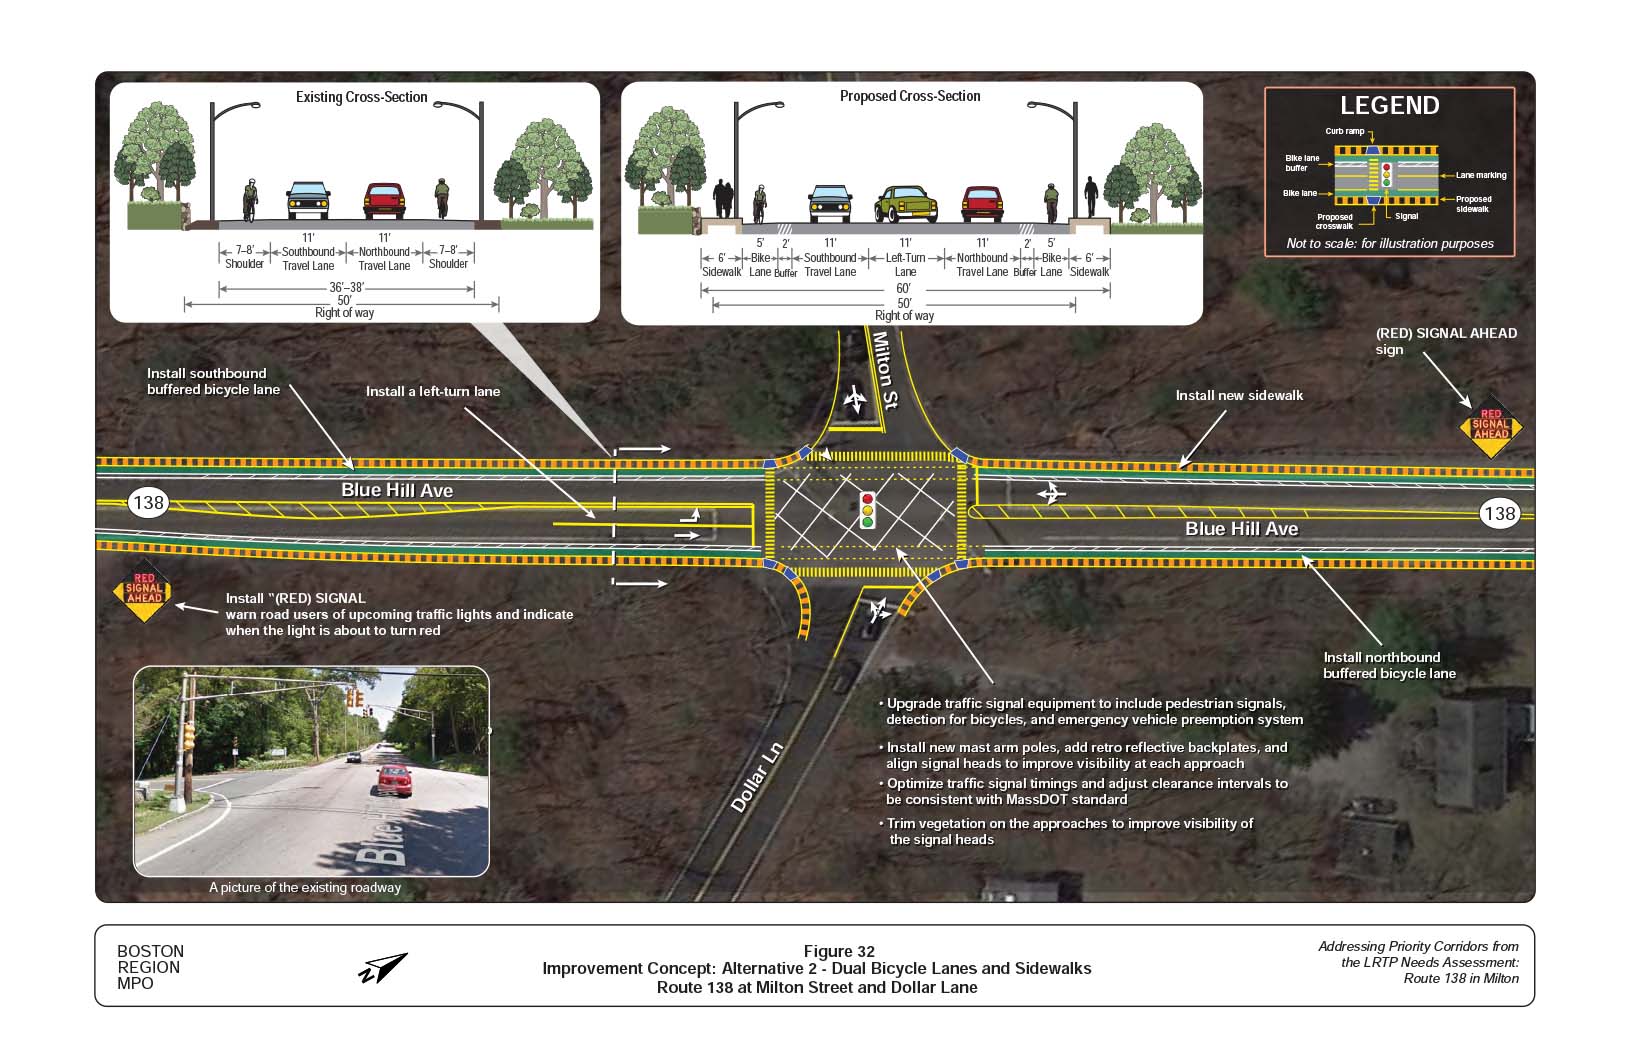 Figure 32 is an aerial photo of Route 138 at Milton Street/Dollar Lane showing Alternative 2, dual bicycle lanes and sidewalks, and overlays showing the existing and proposed cross-sections.